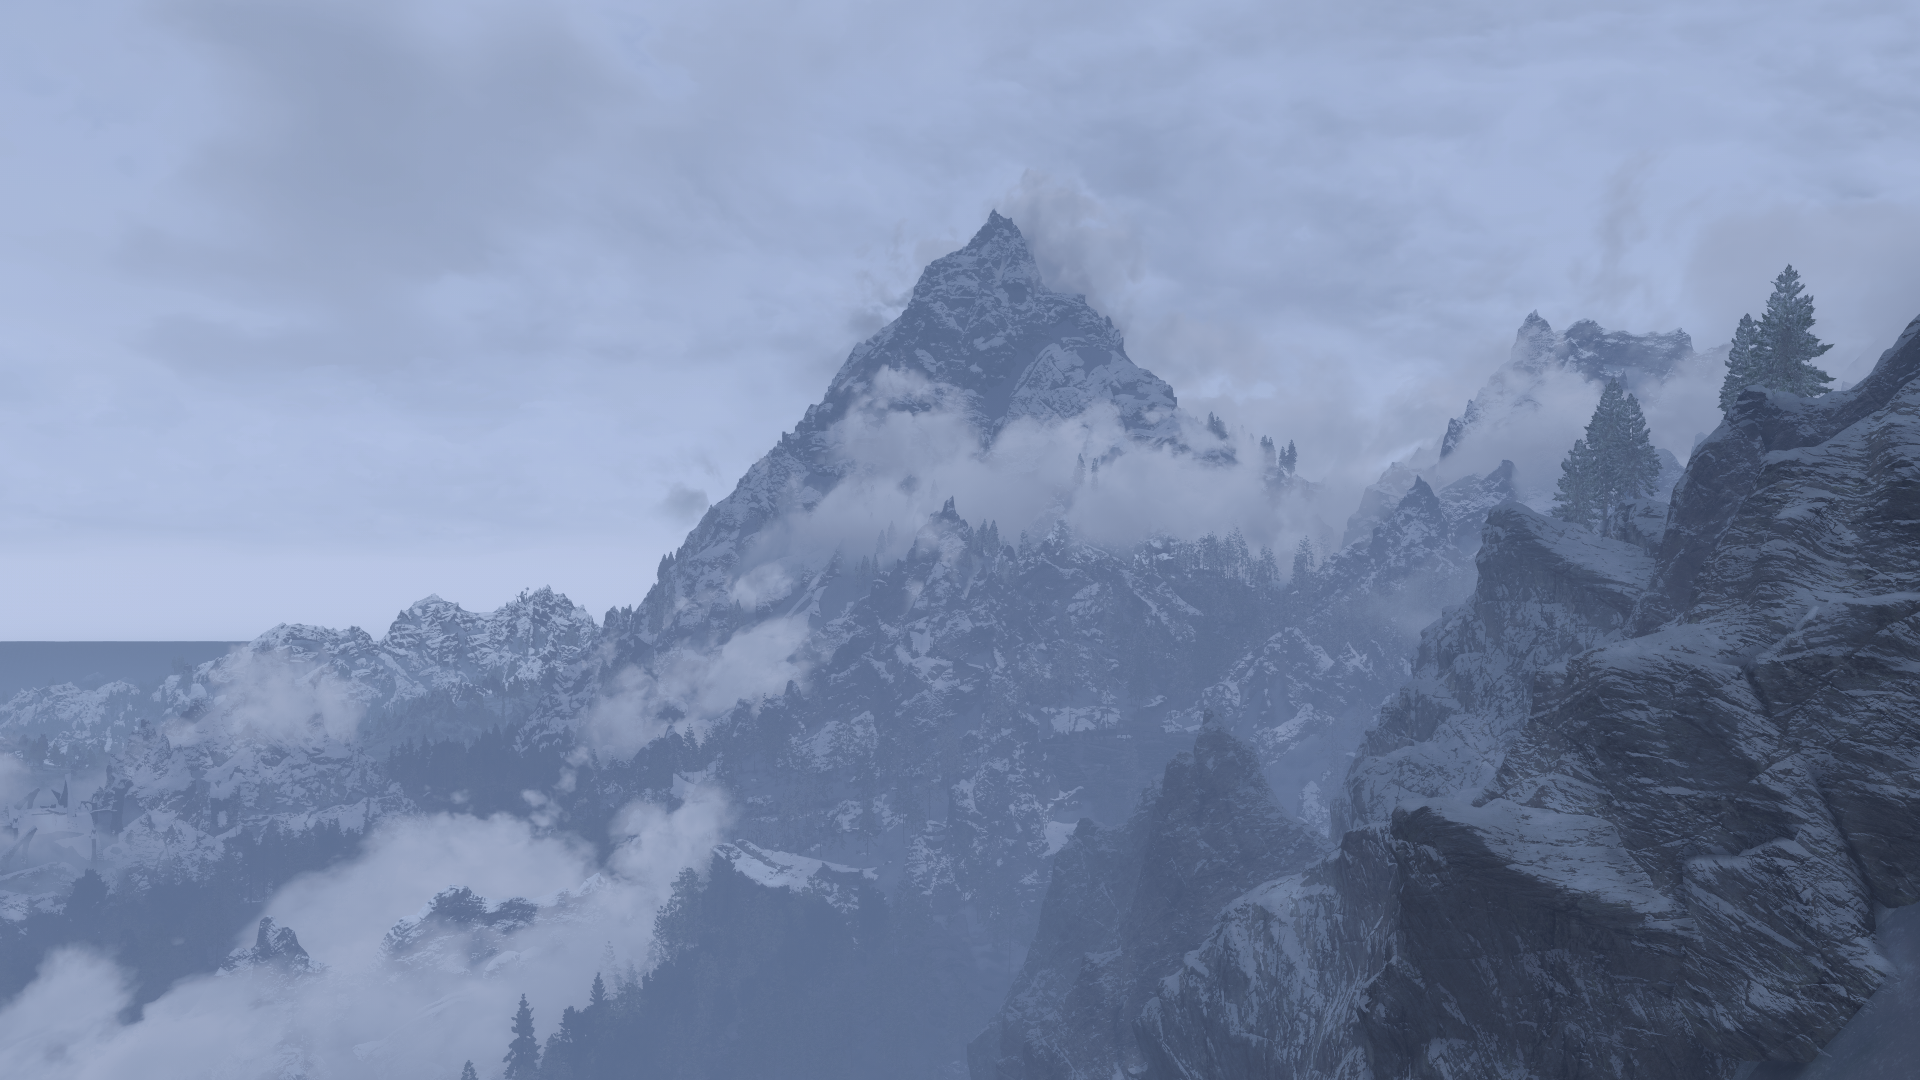 General 1920x1080 The Elder Scrolls V: Skyrim Special Edition The Elder Scrolls V: Skyrim Skyrim Remastered mist video game art sky clouds video games mountains snow trees CGI